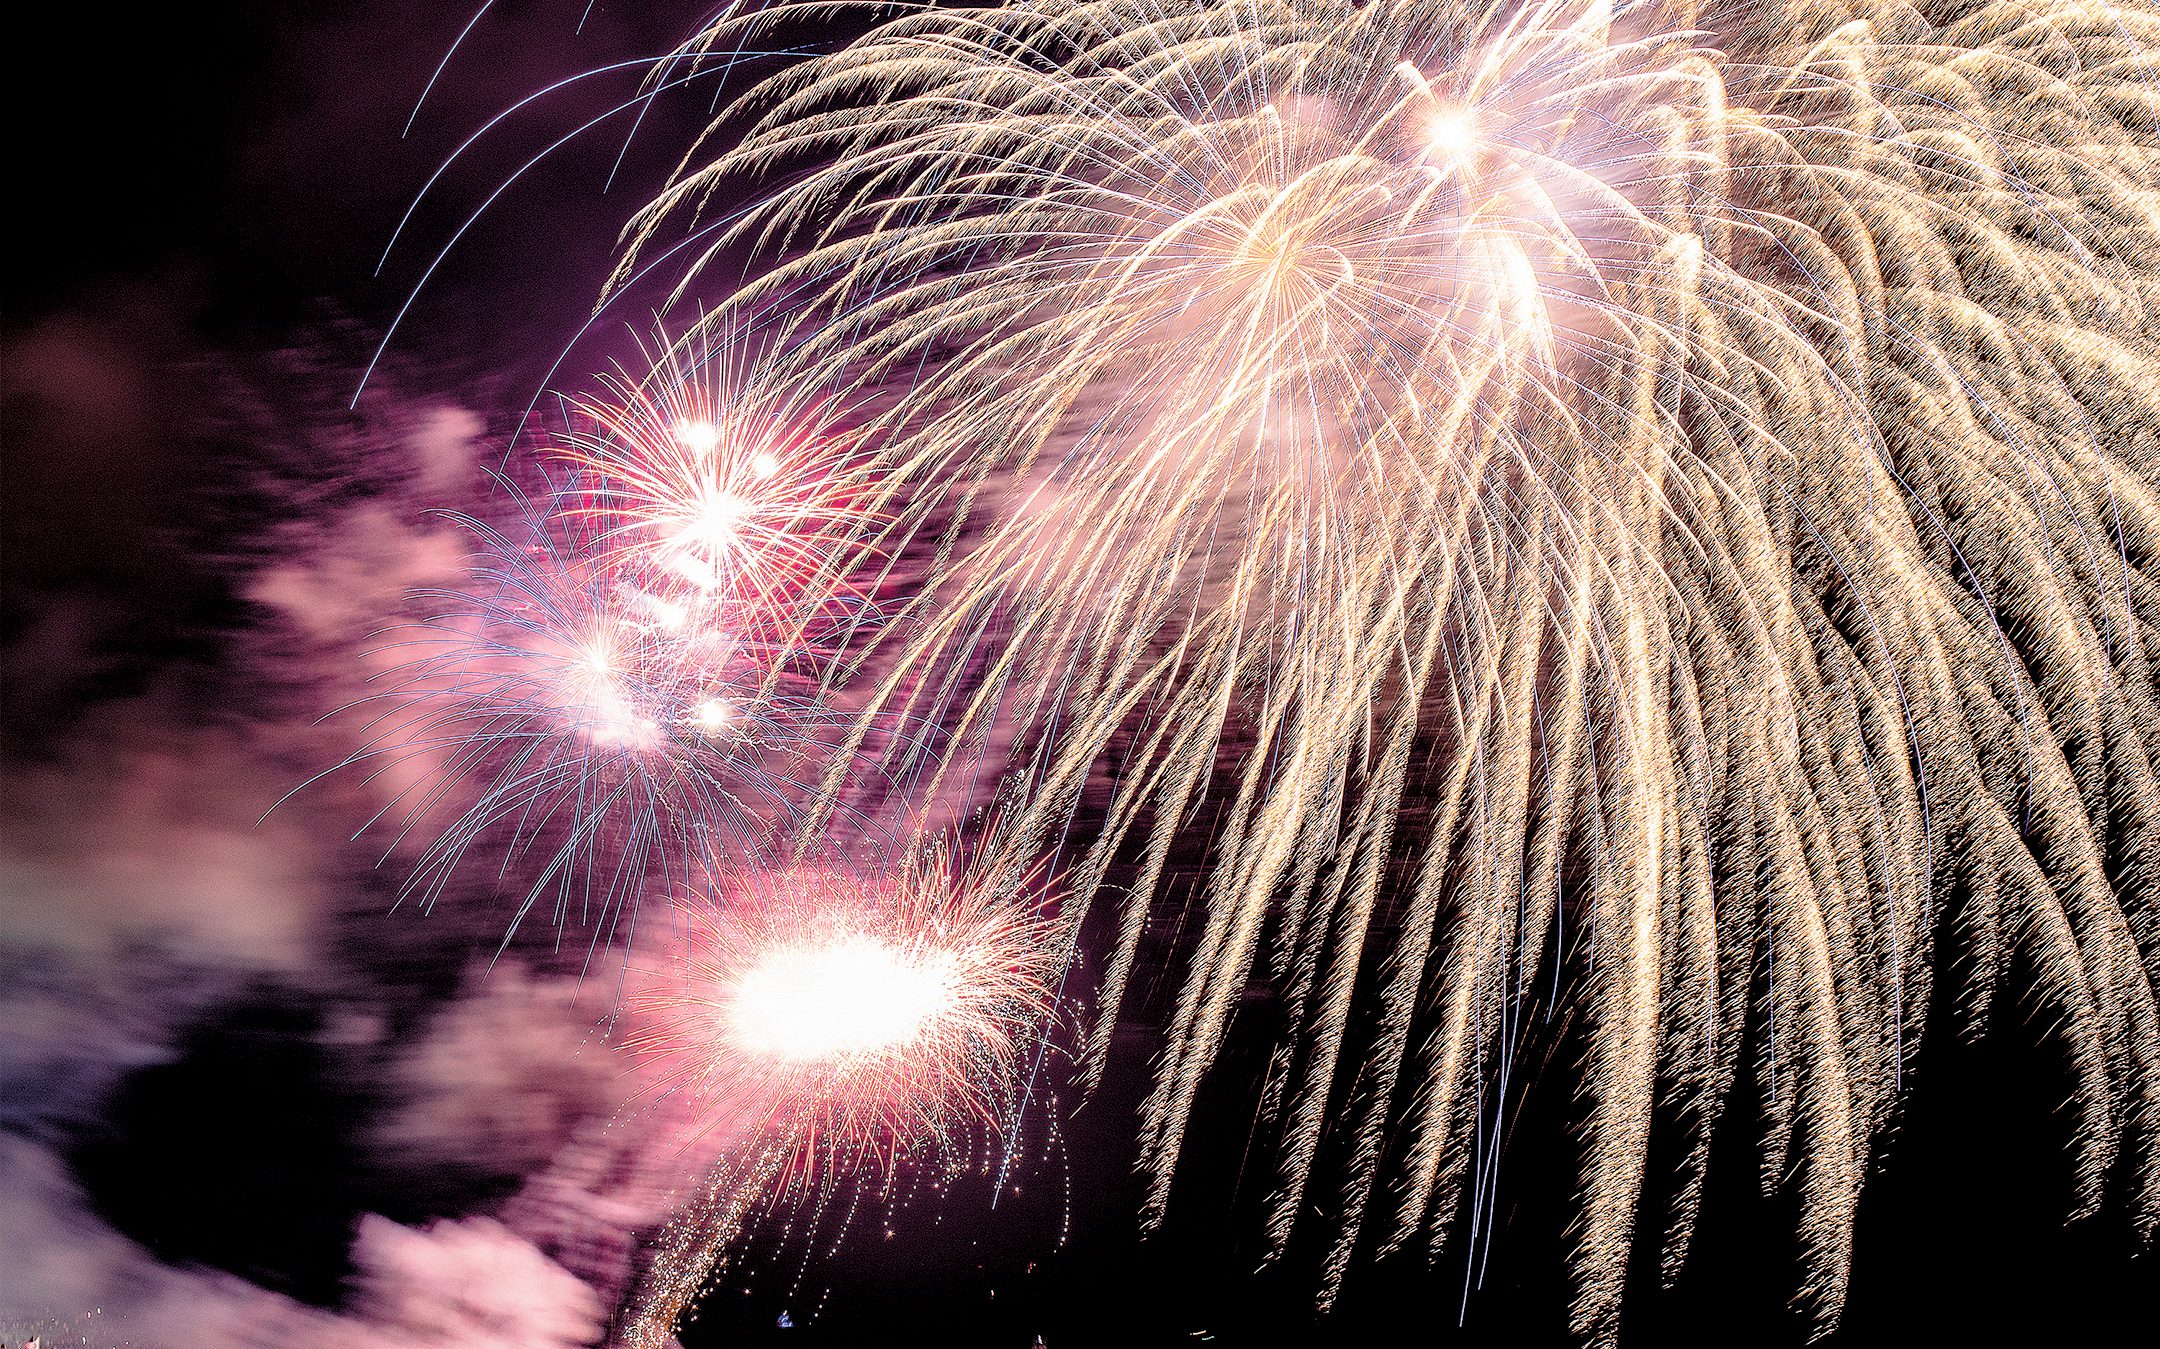 Hackensack Meridian Riverview Medical Center Foundation will once again bring fireworks to the Navesink River July 3, lighting up Red Bank’s night sky. Eduardo Pinzon